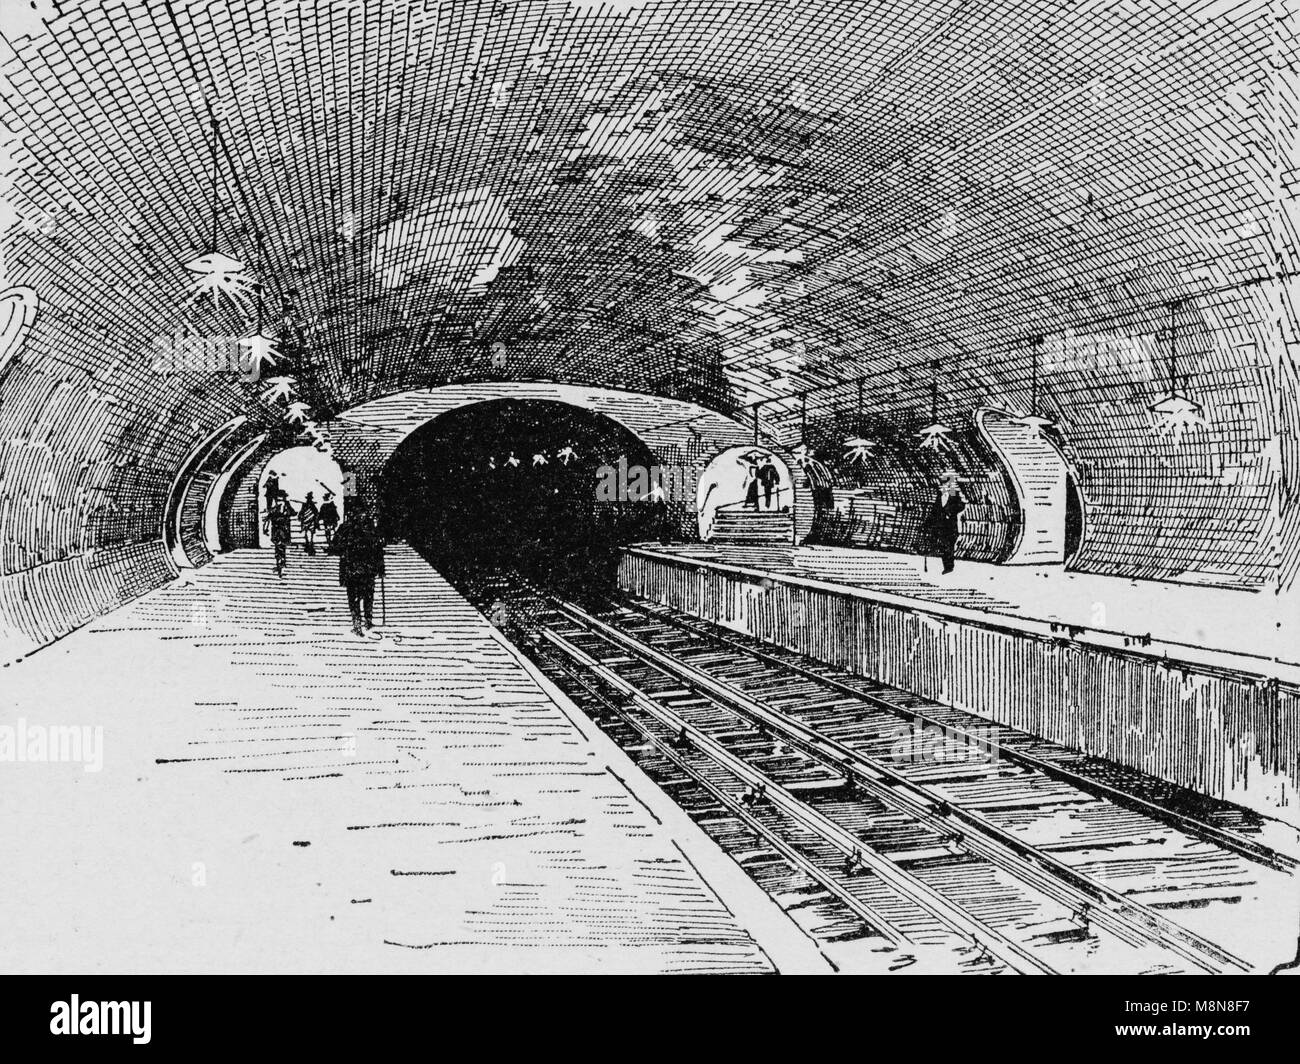 Place de l’Etoile subway station, Paris, Picture from the French weekly newspaper l'Illustration, 14th  July 1900 Stock Photo